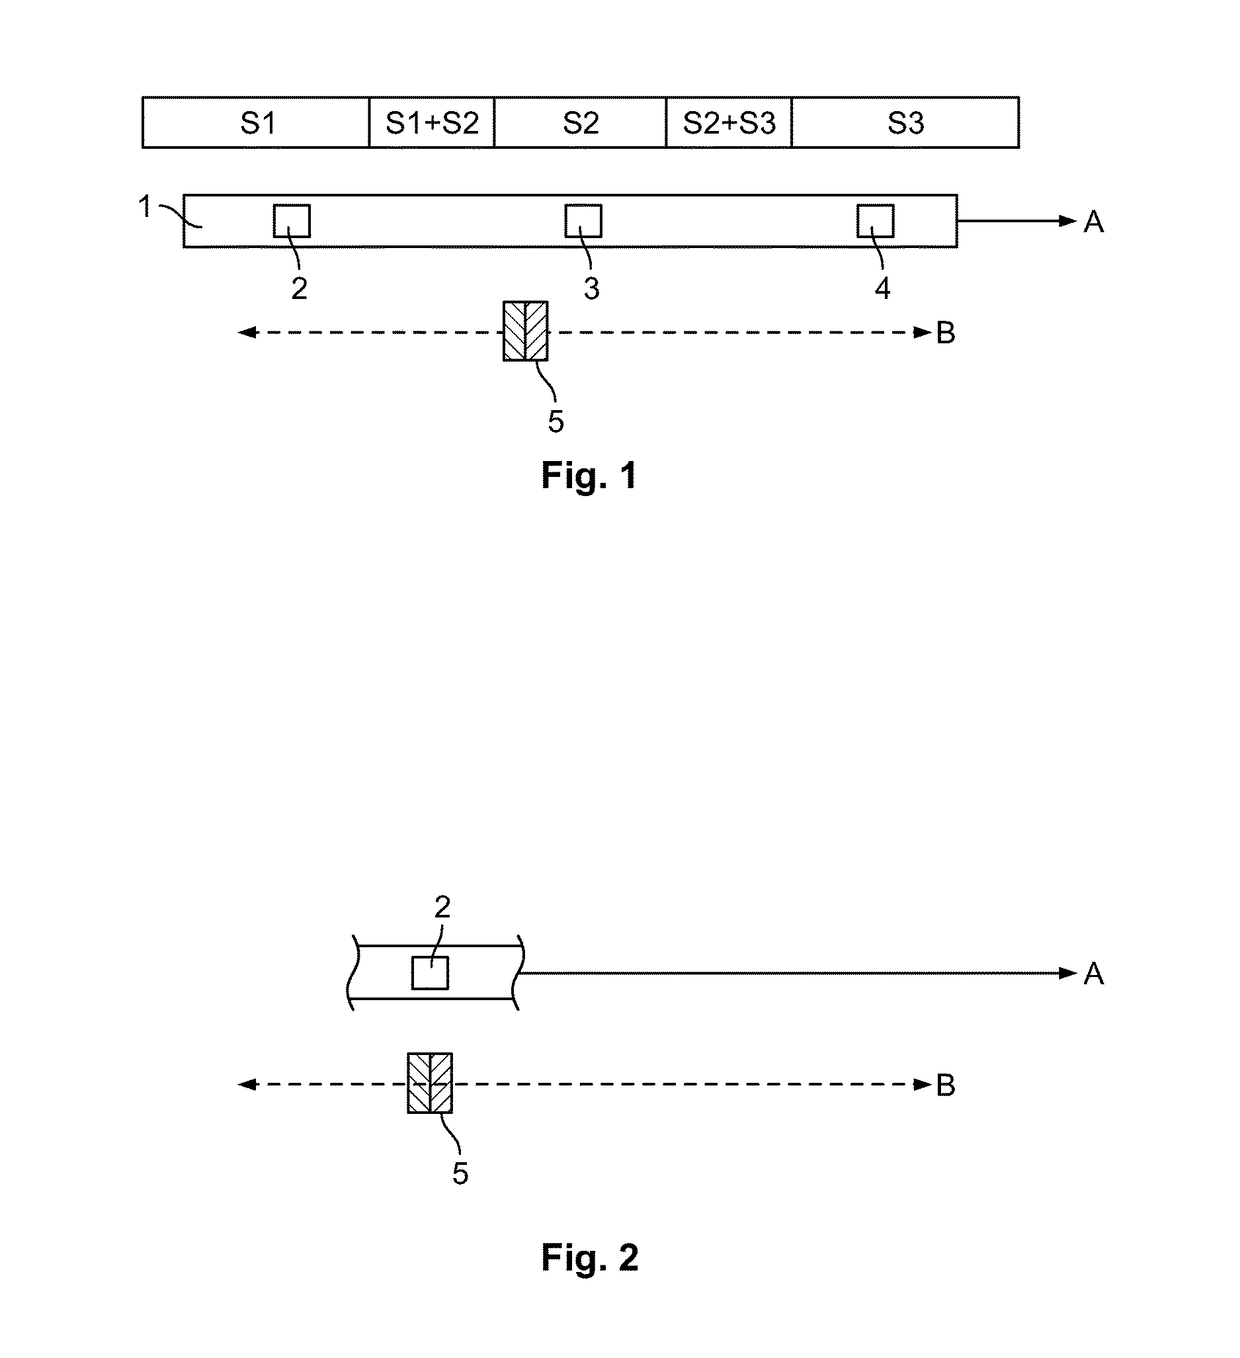 Method for Determining the Position of a Magnet Relative to a Row of Sensors